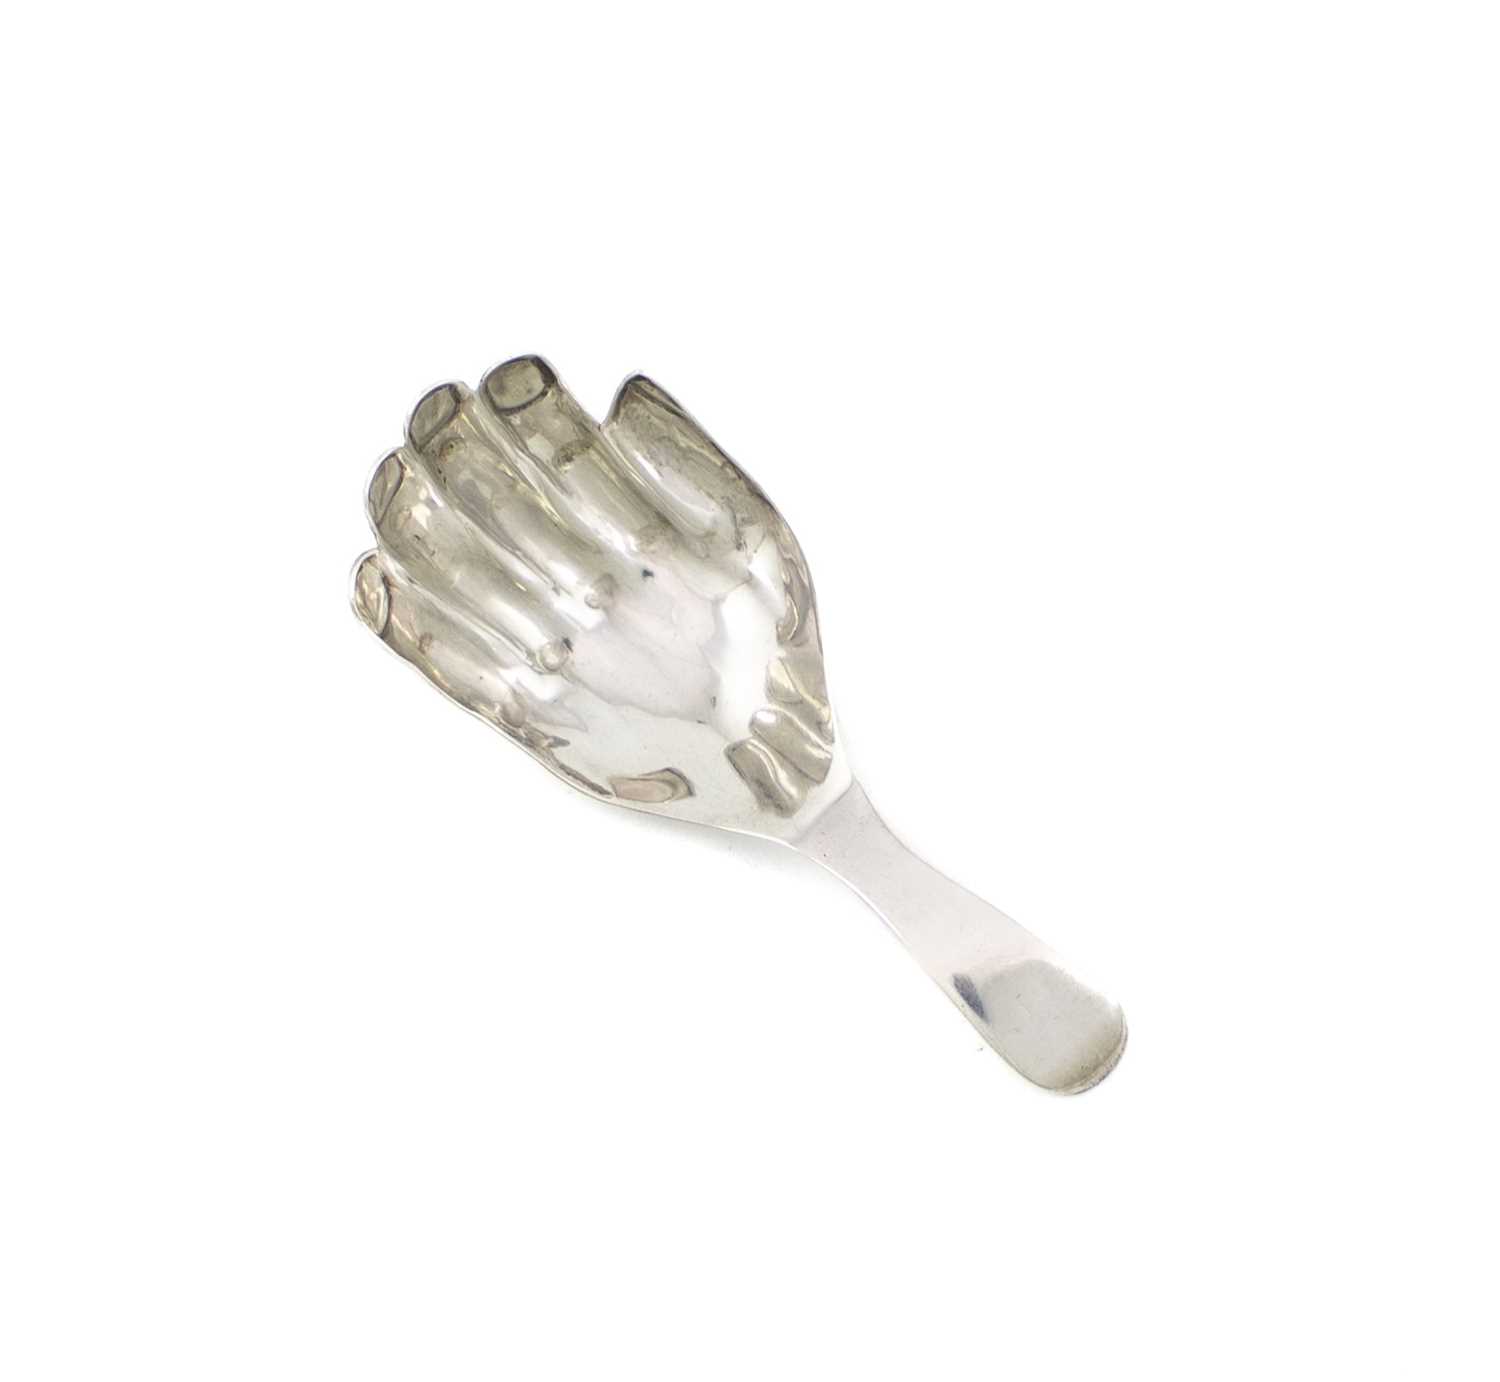 A George III silver right-hand caddy spoon, by Eley and Fearn, London 1800, Old English pattern